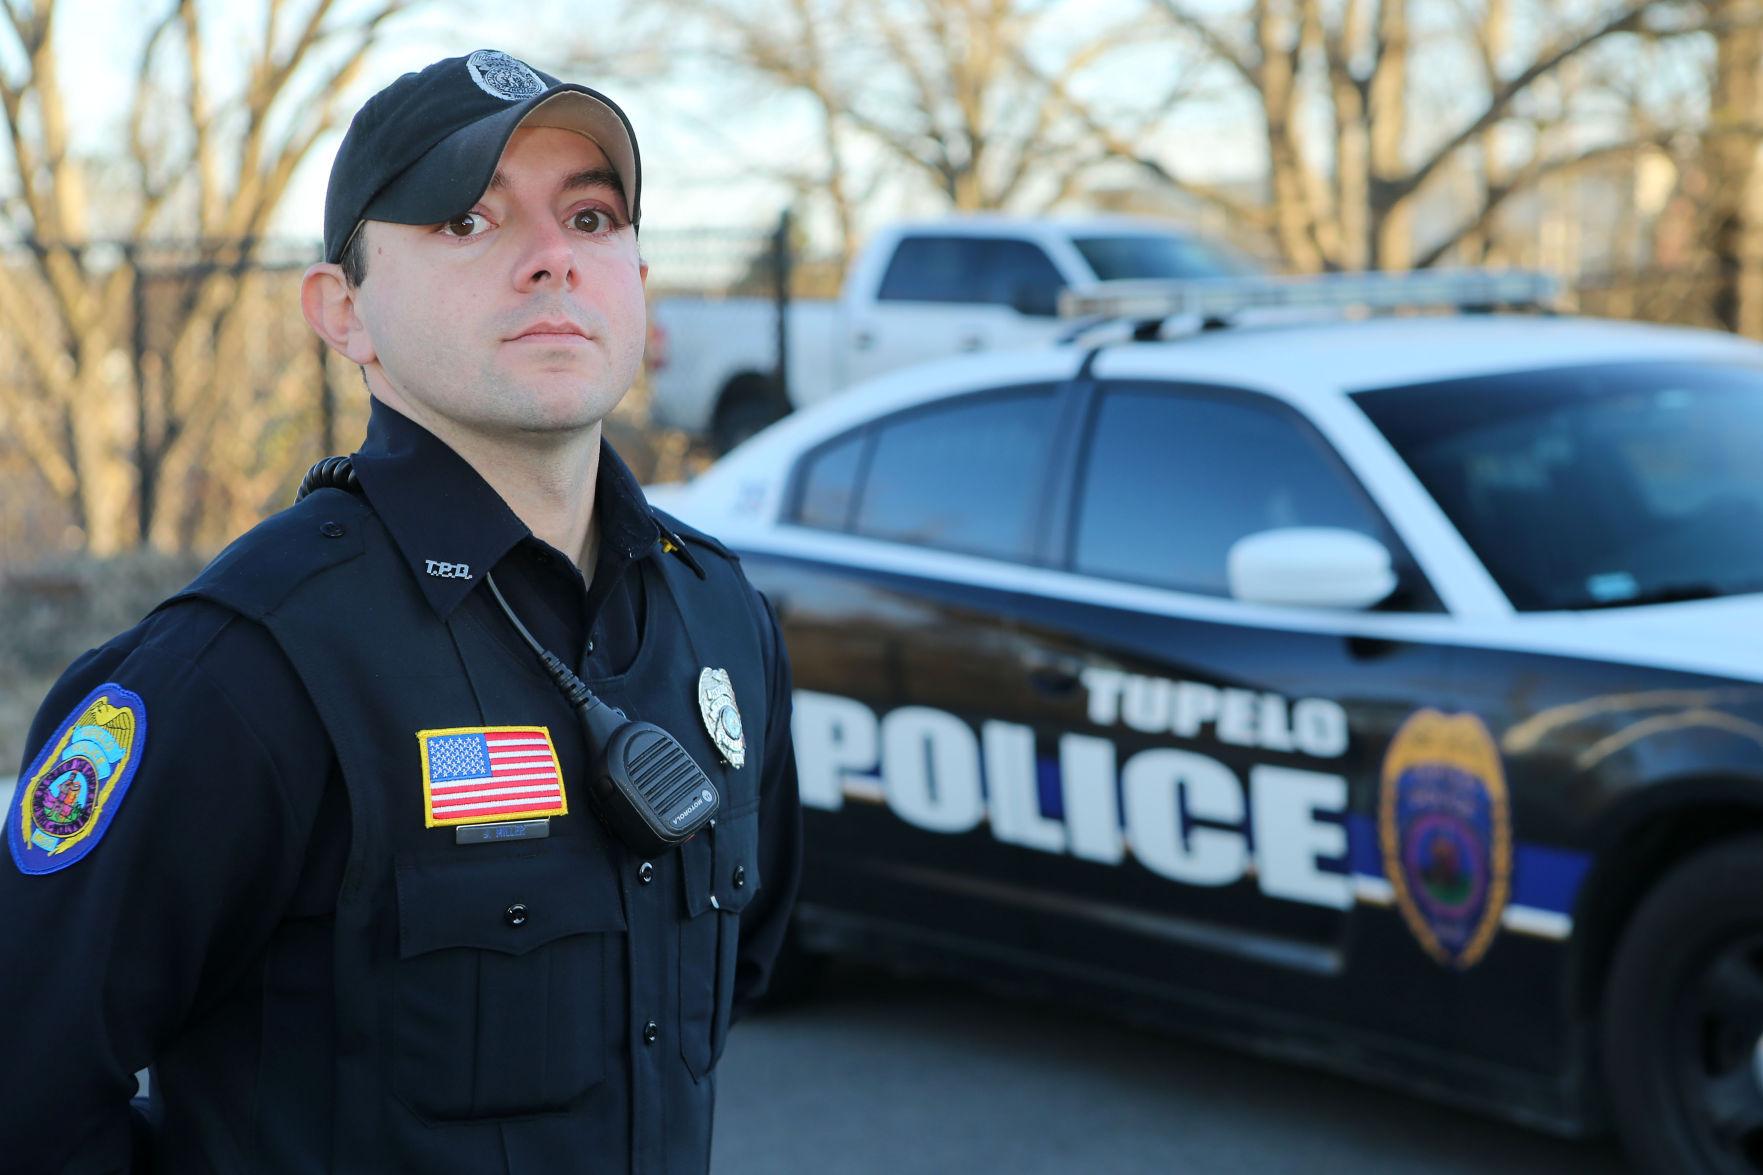 To protect and serve Tupelo Police officer finds duty in service at